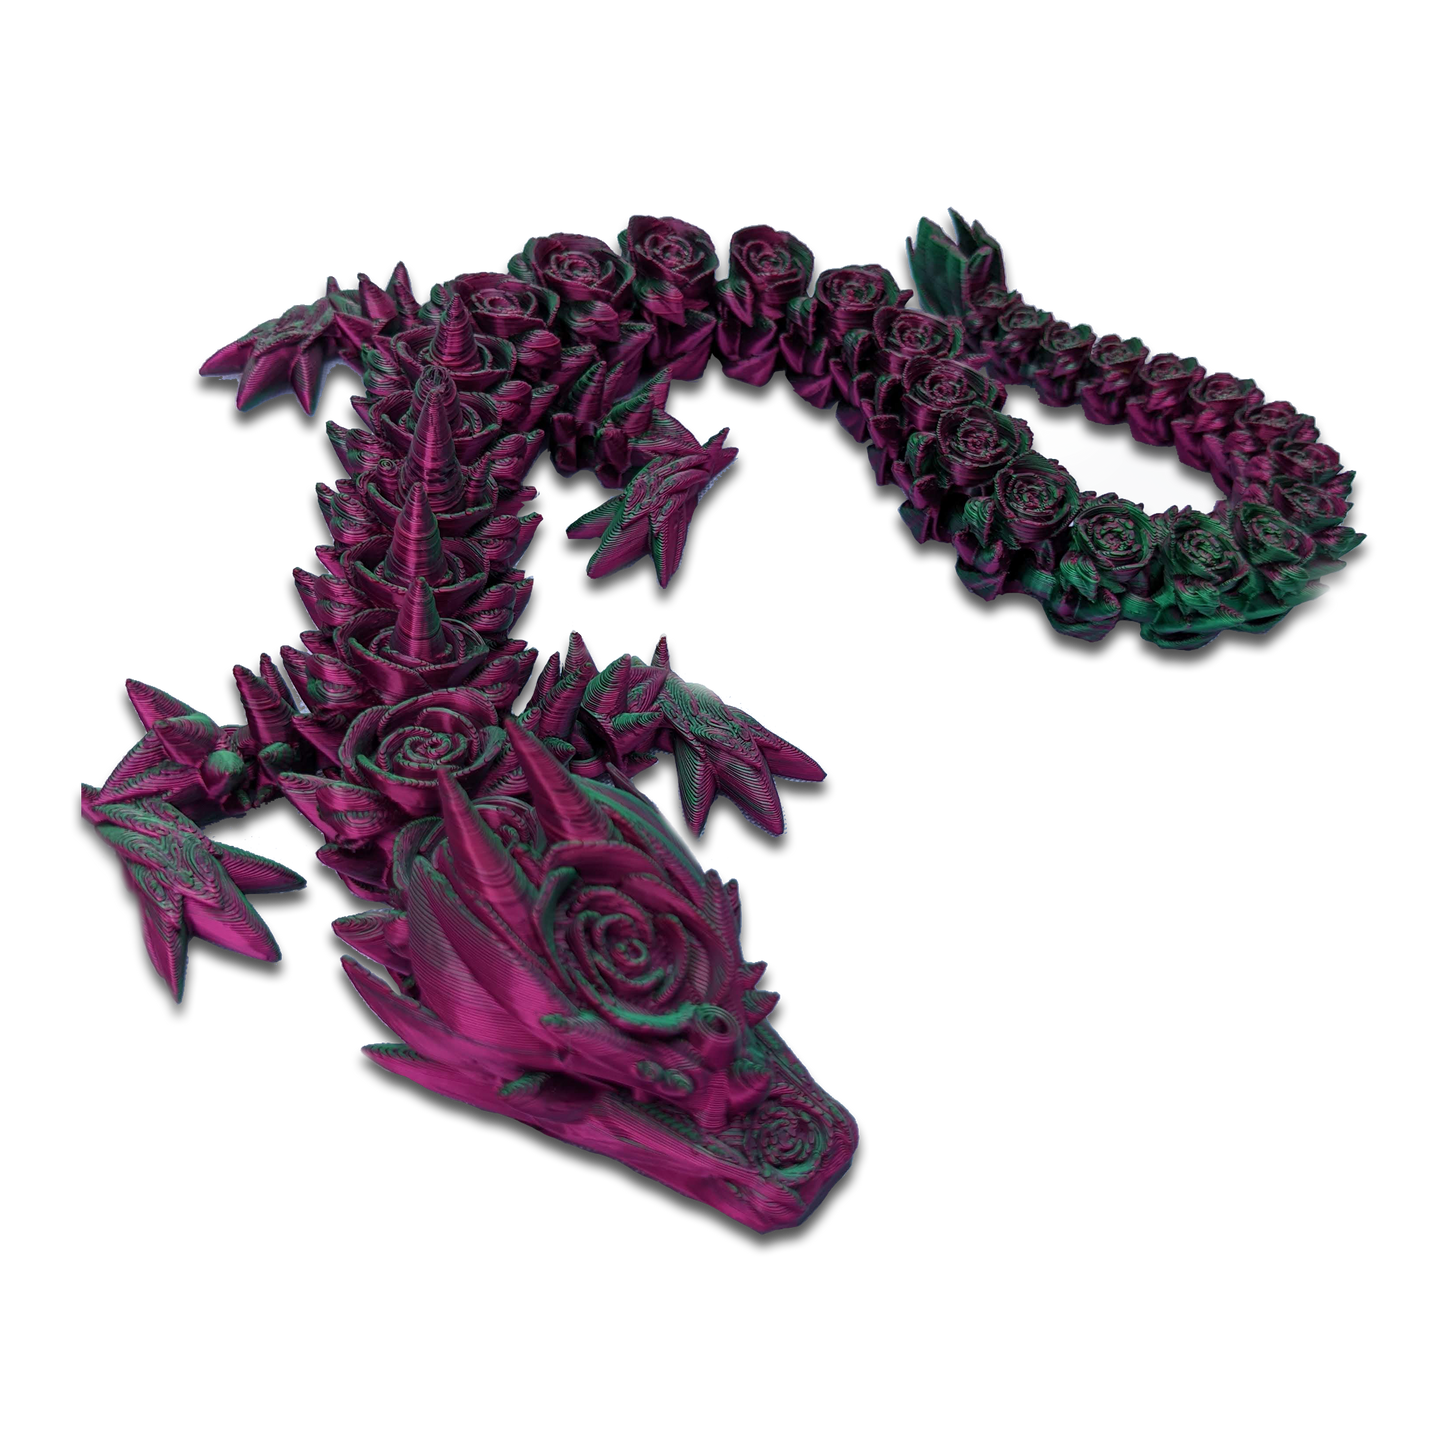 MISS PRINTED-3D Printed Articulated Dragons- ADULT ROSE DRAGON